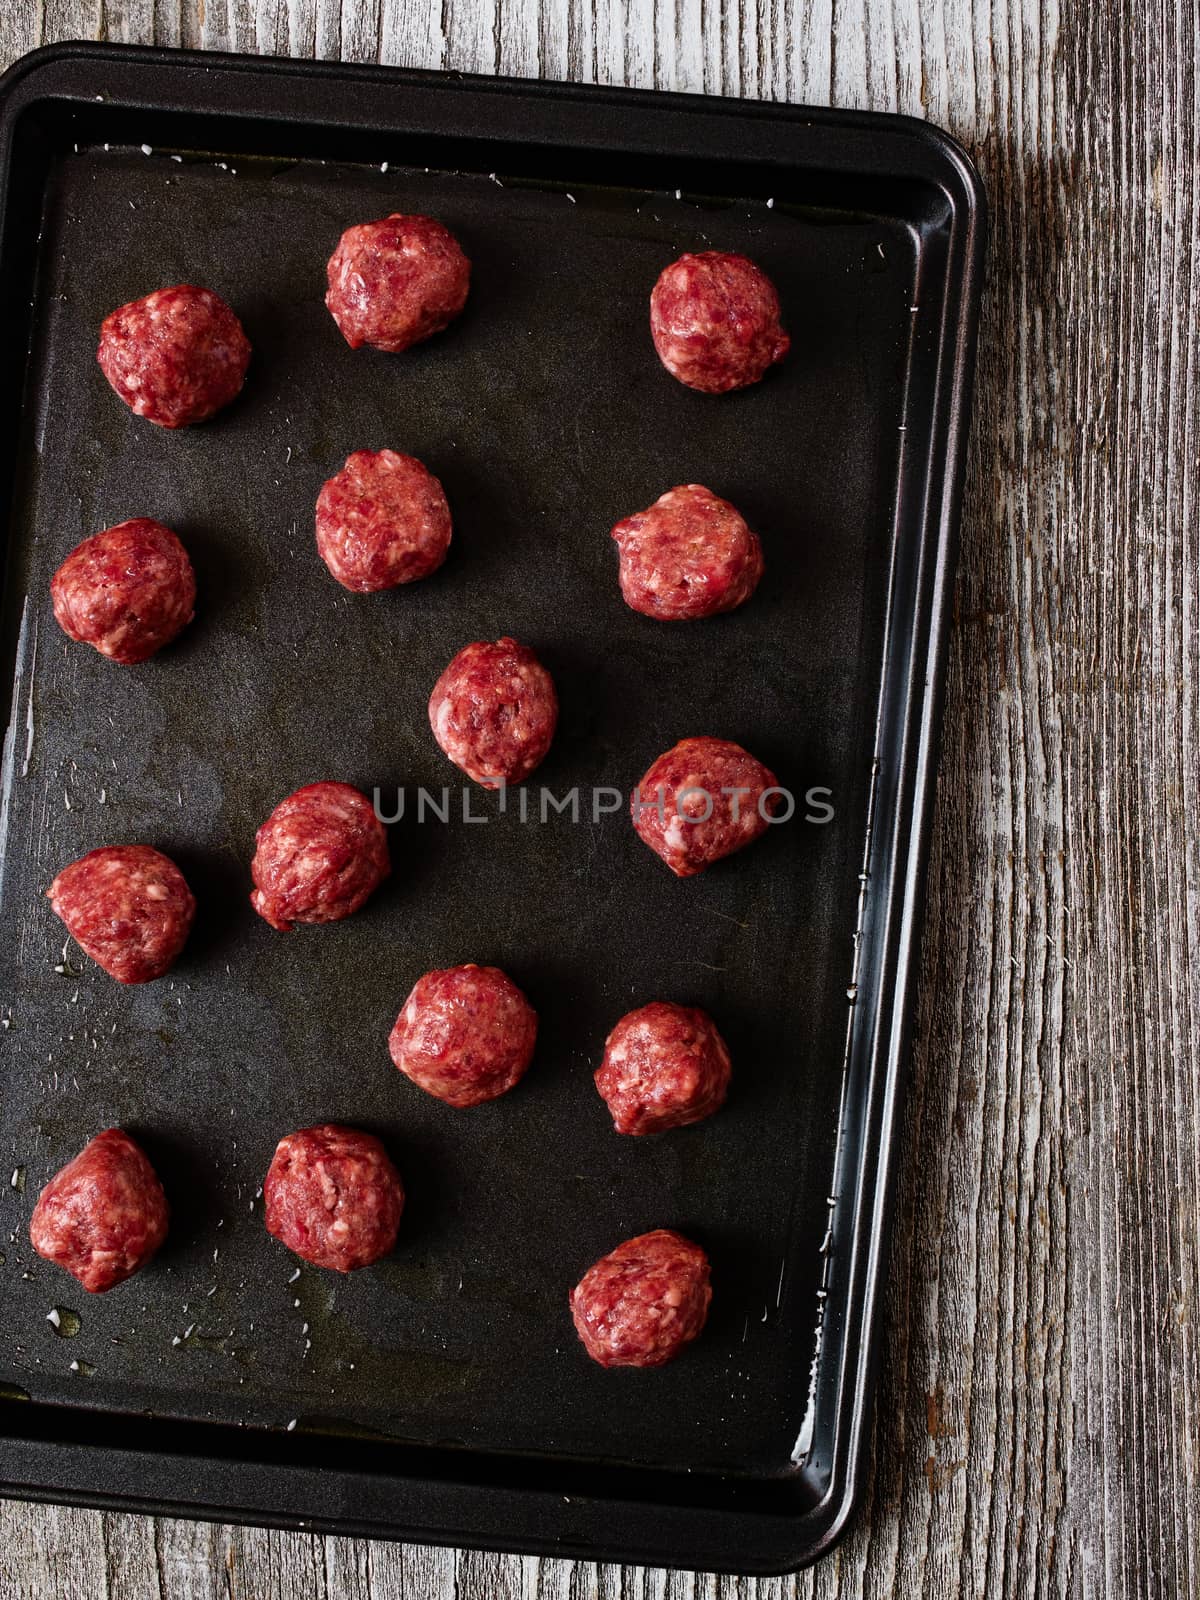 tray of uncooked meatball by zkruger